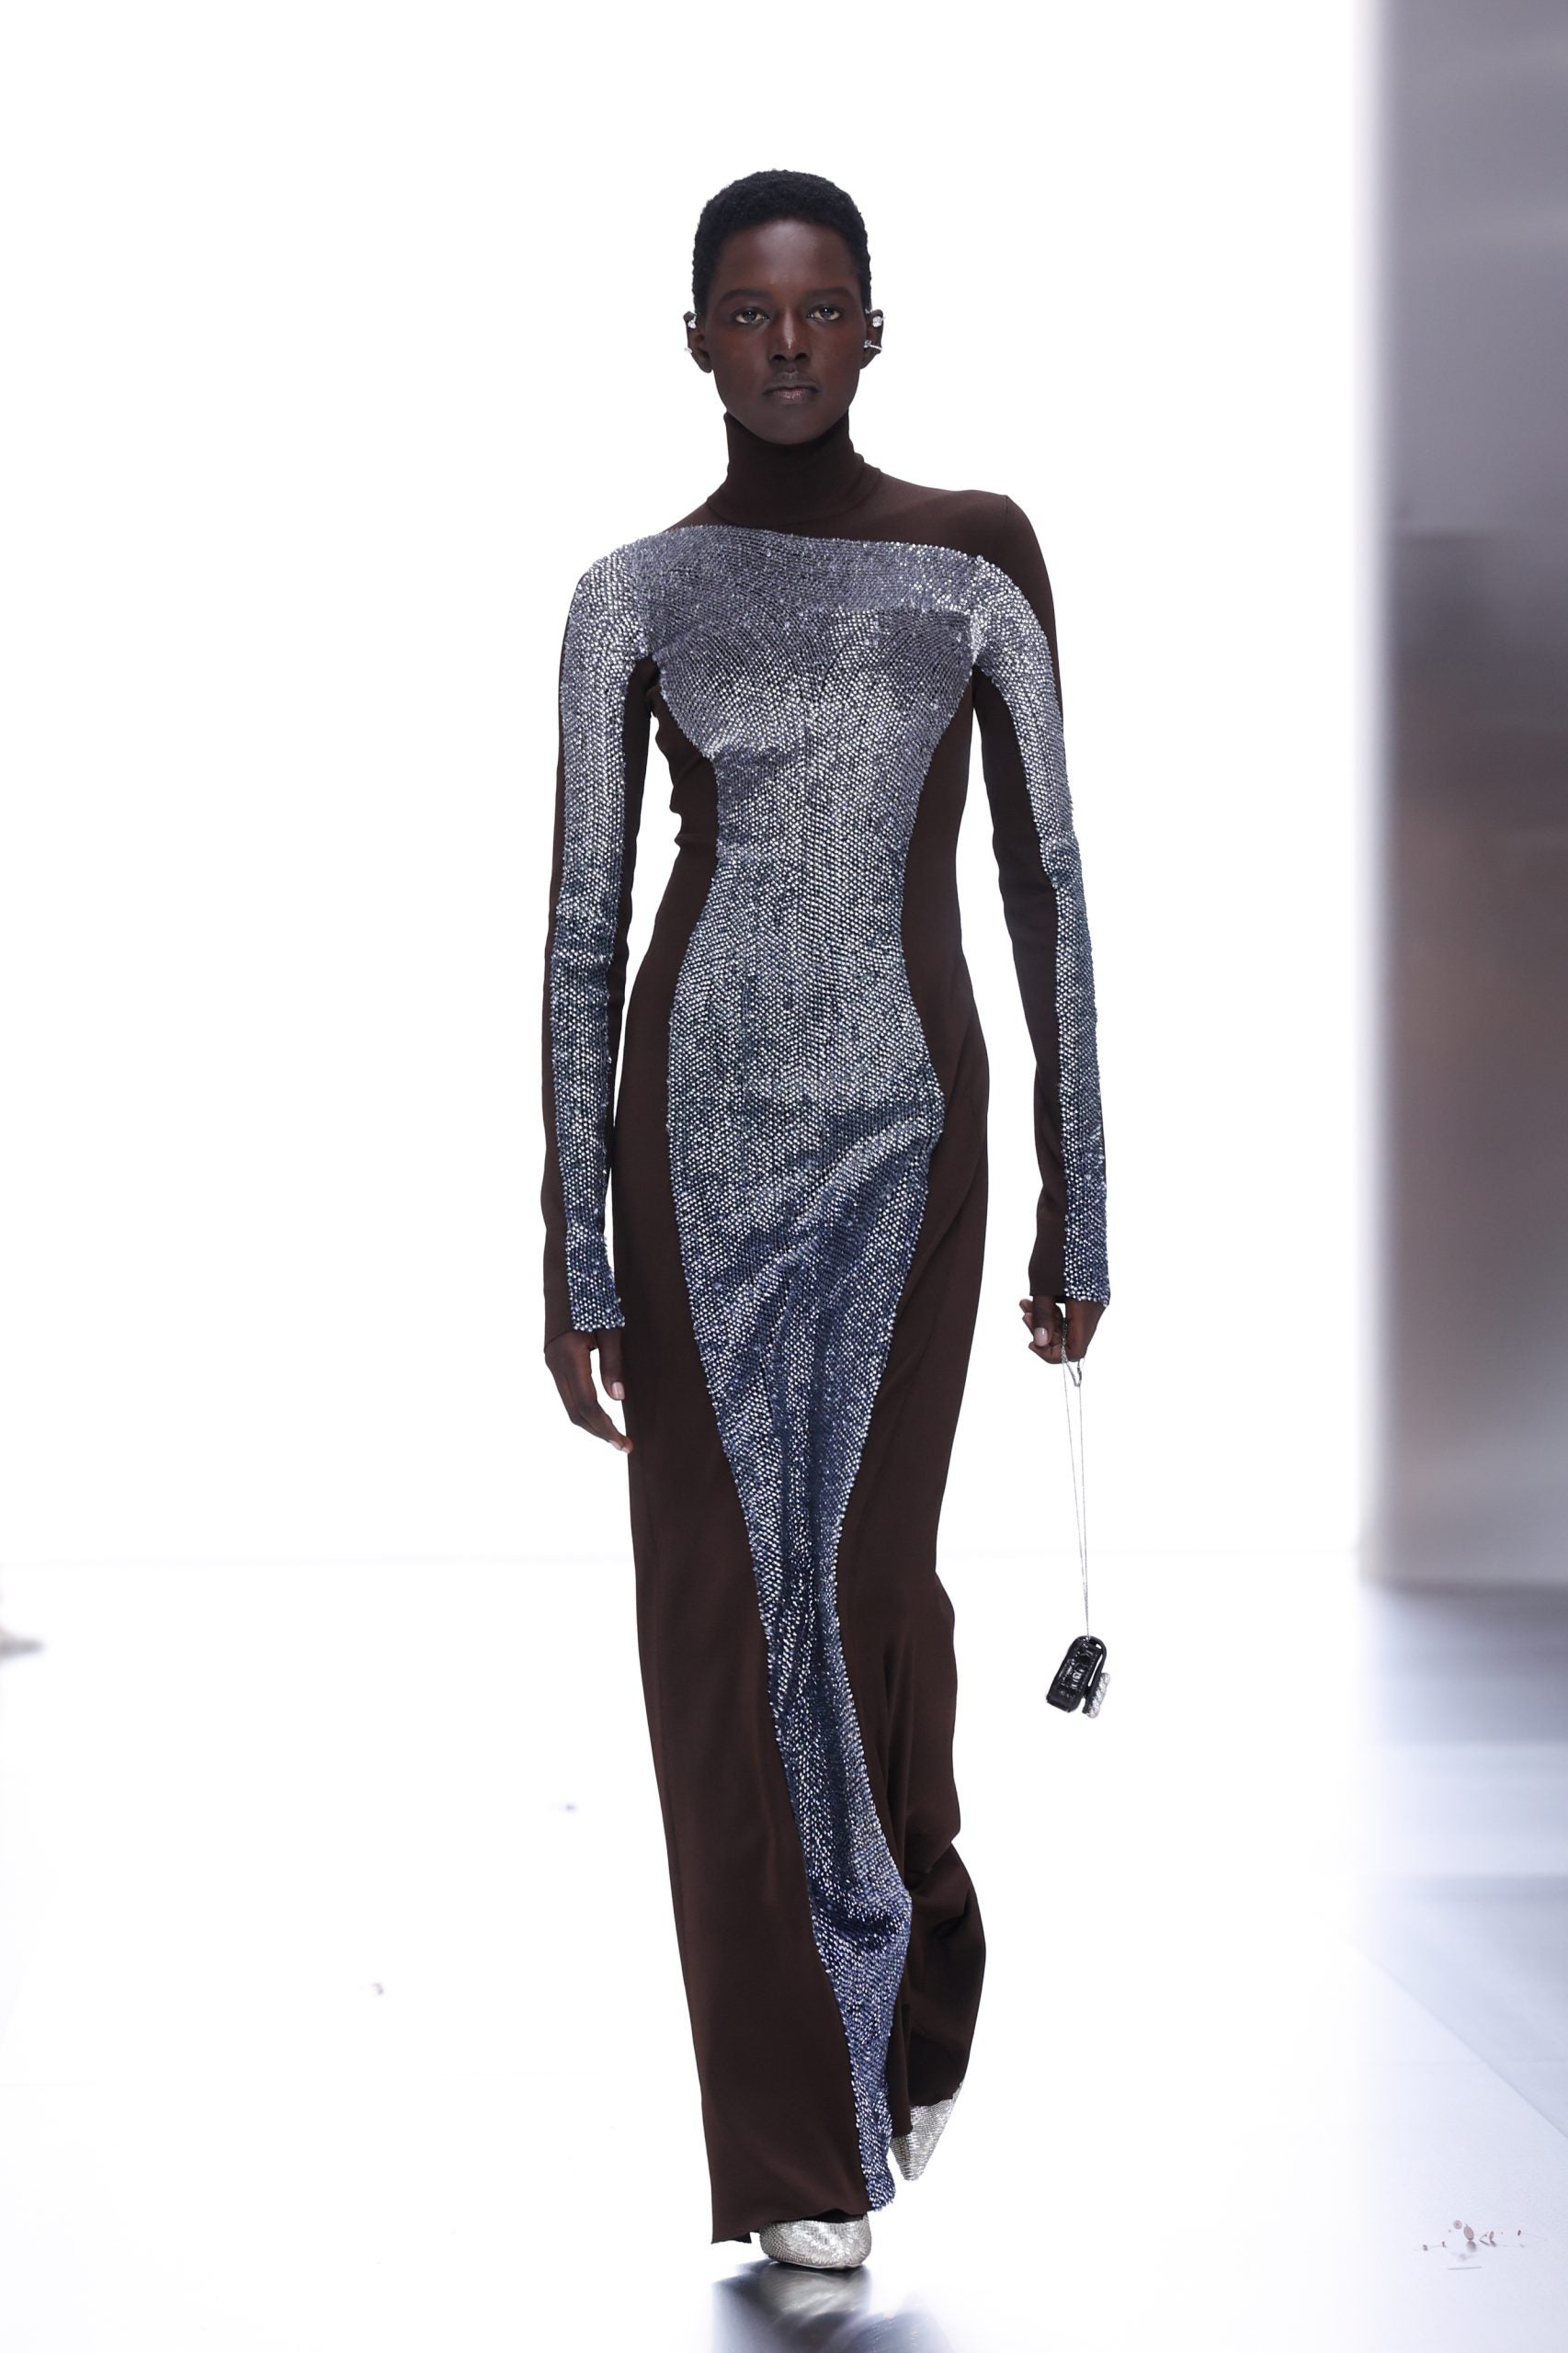 The Trends From Paris Haute Couture Week We Are Most Excited About ...